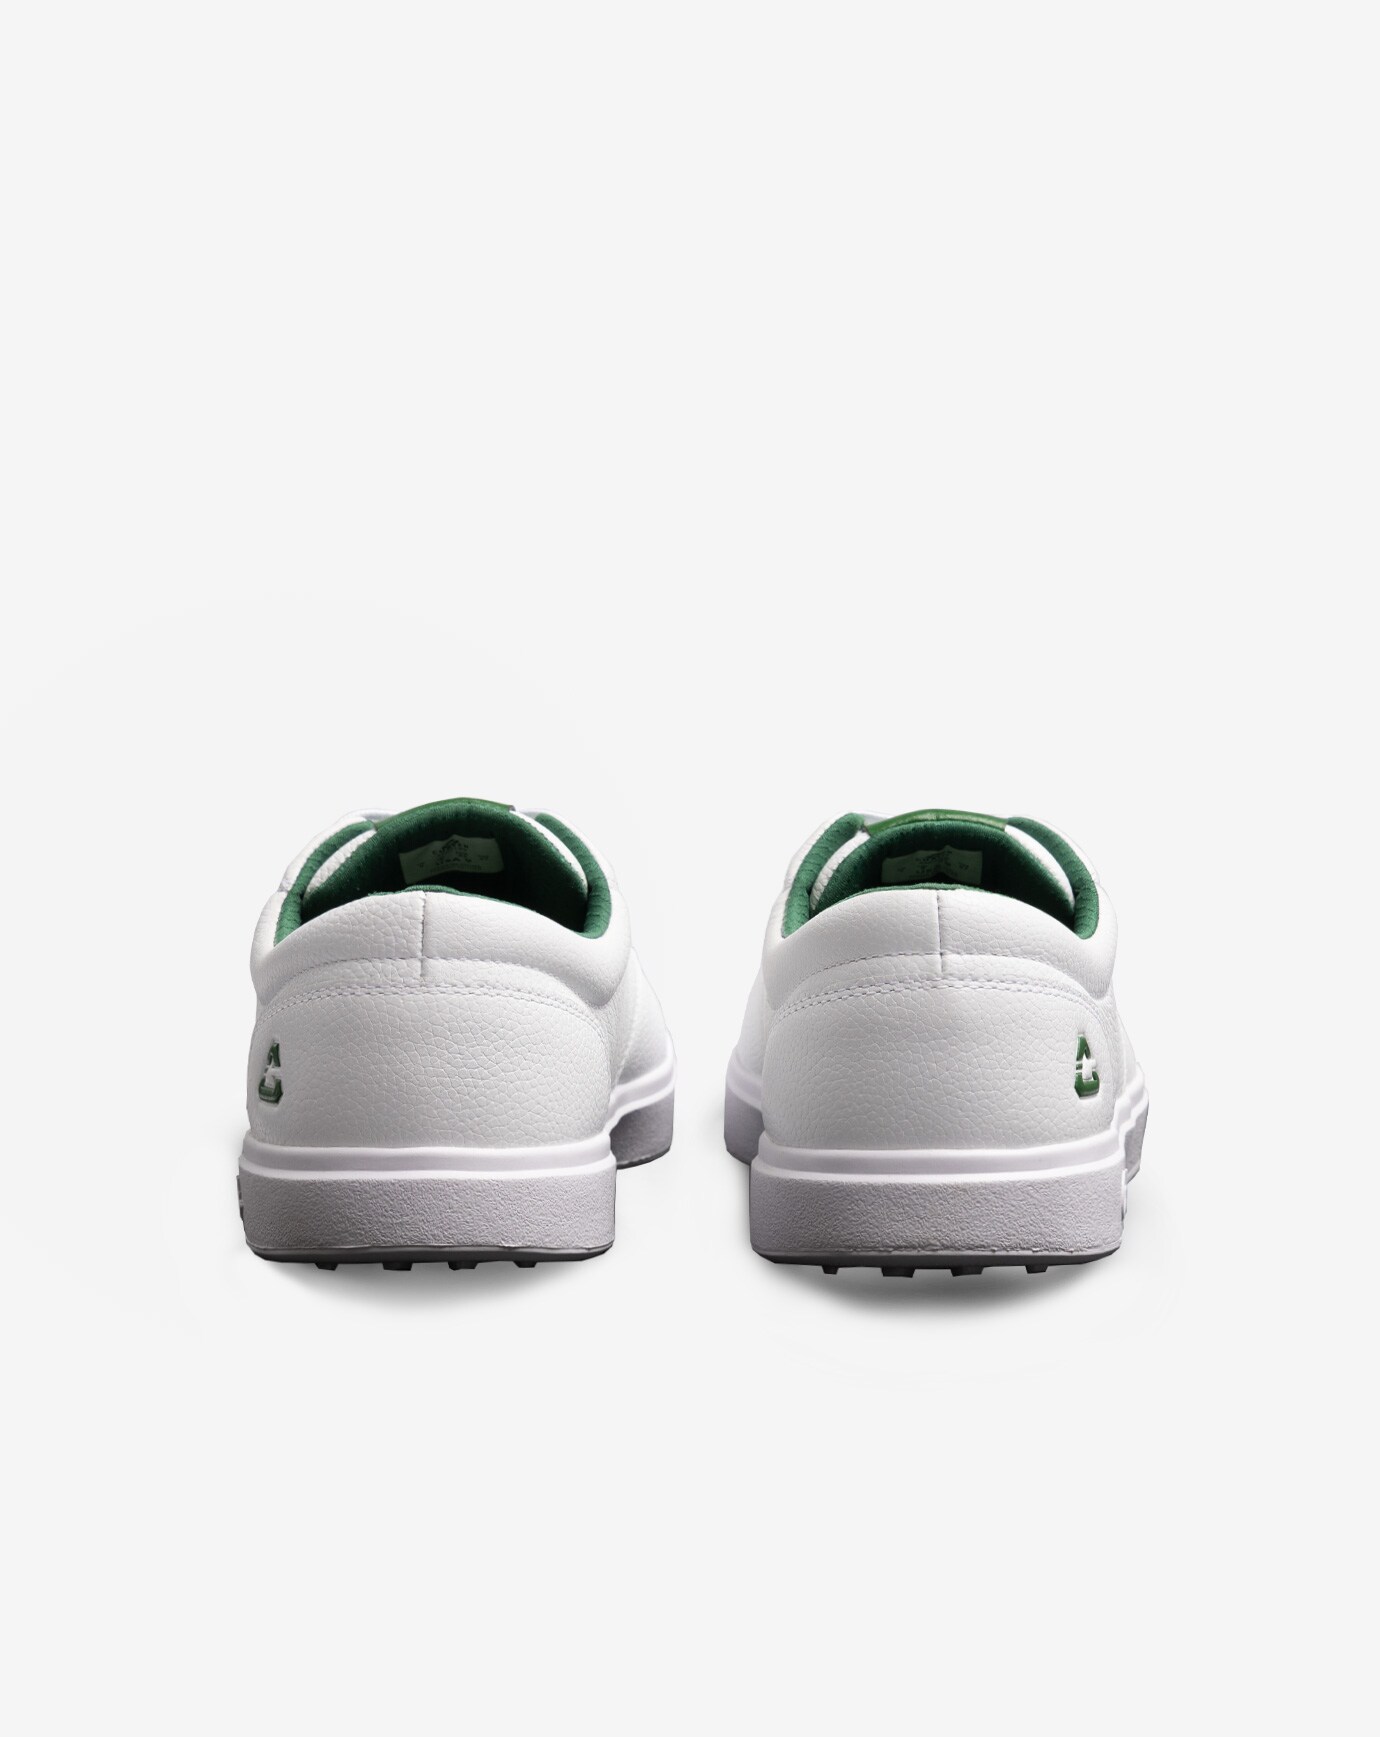 THE WILDCARD LEATHER SPIKELESS GOLF SHOE Image 6